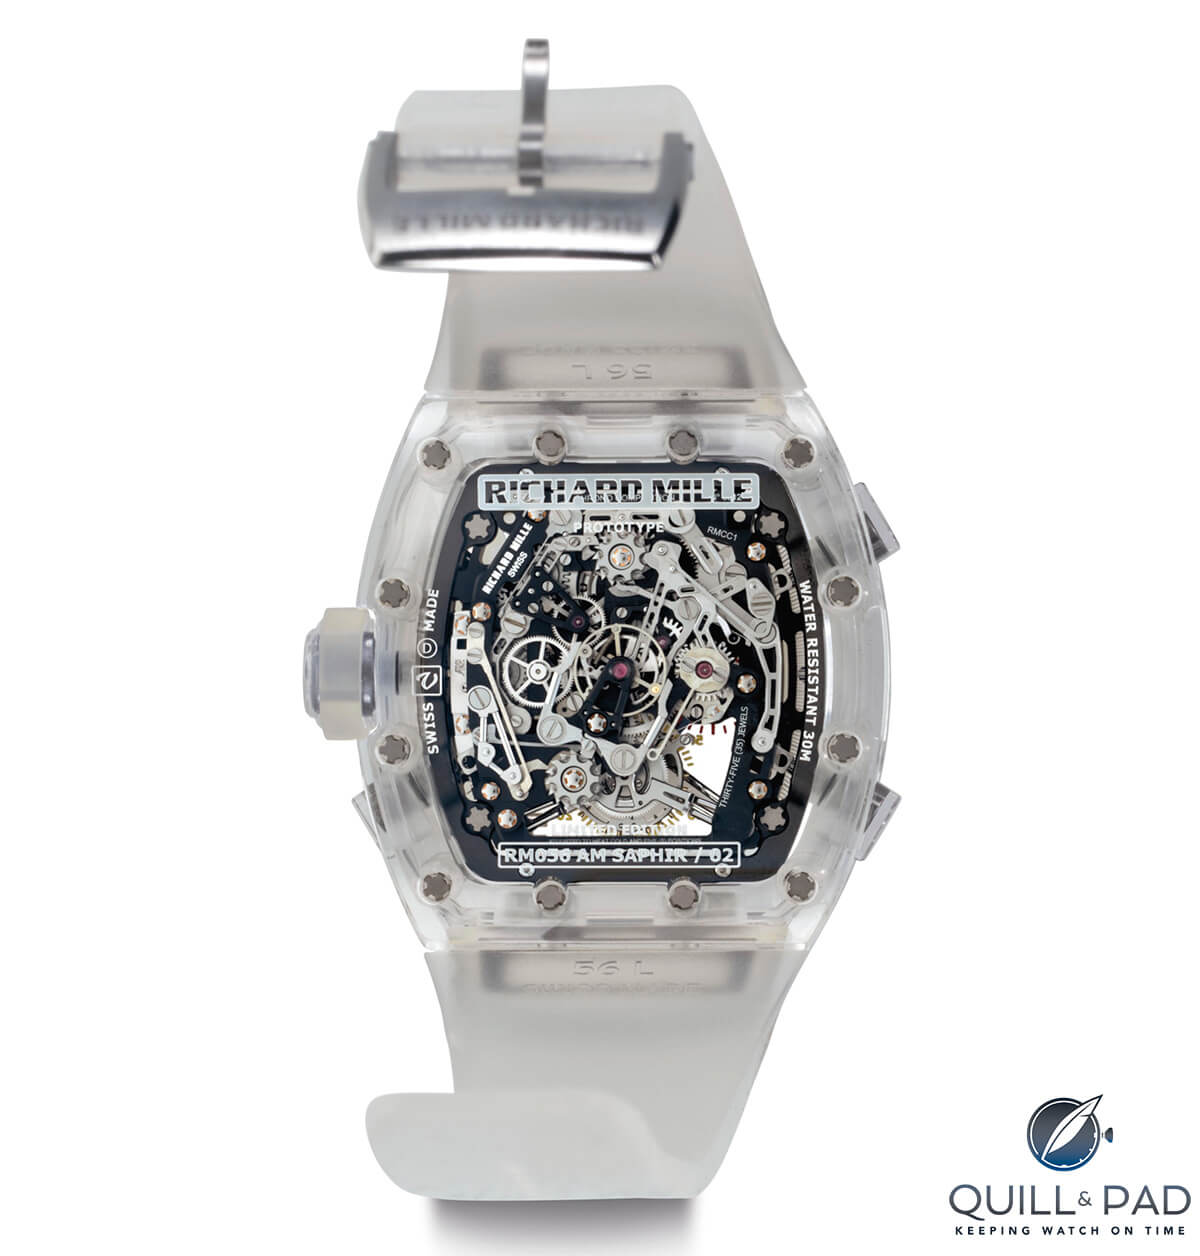 Christies lot 228: Richard Mille RM 056 Prototype No. 2 (back view)